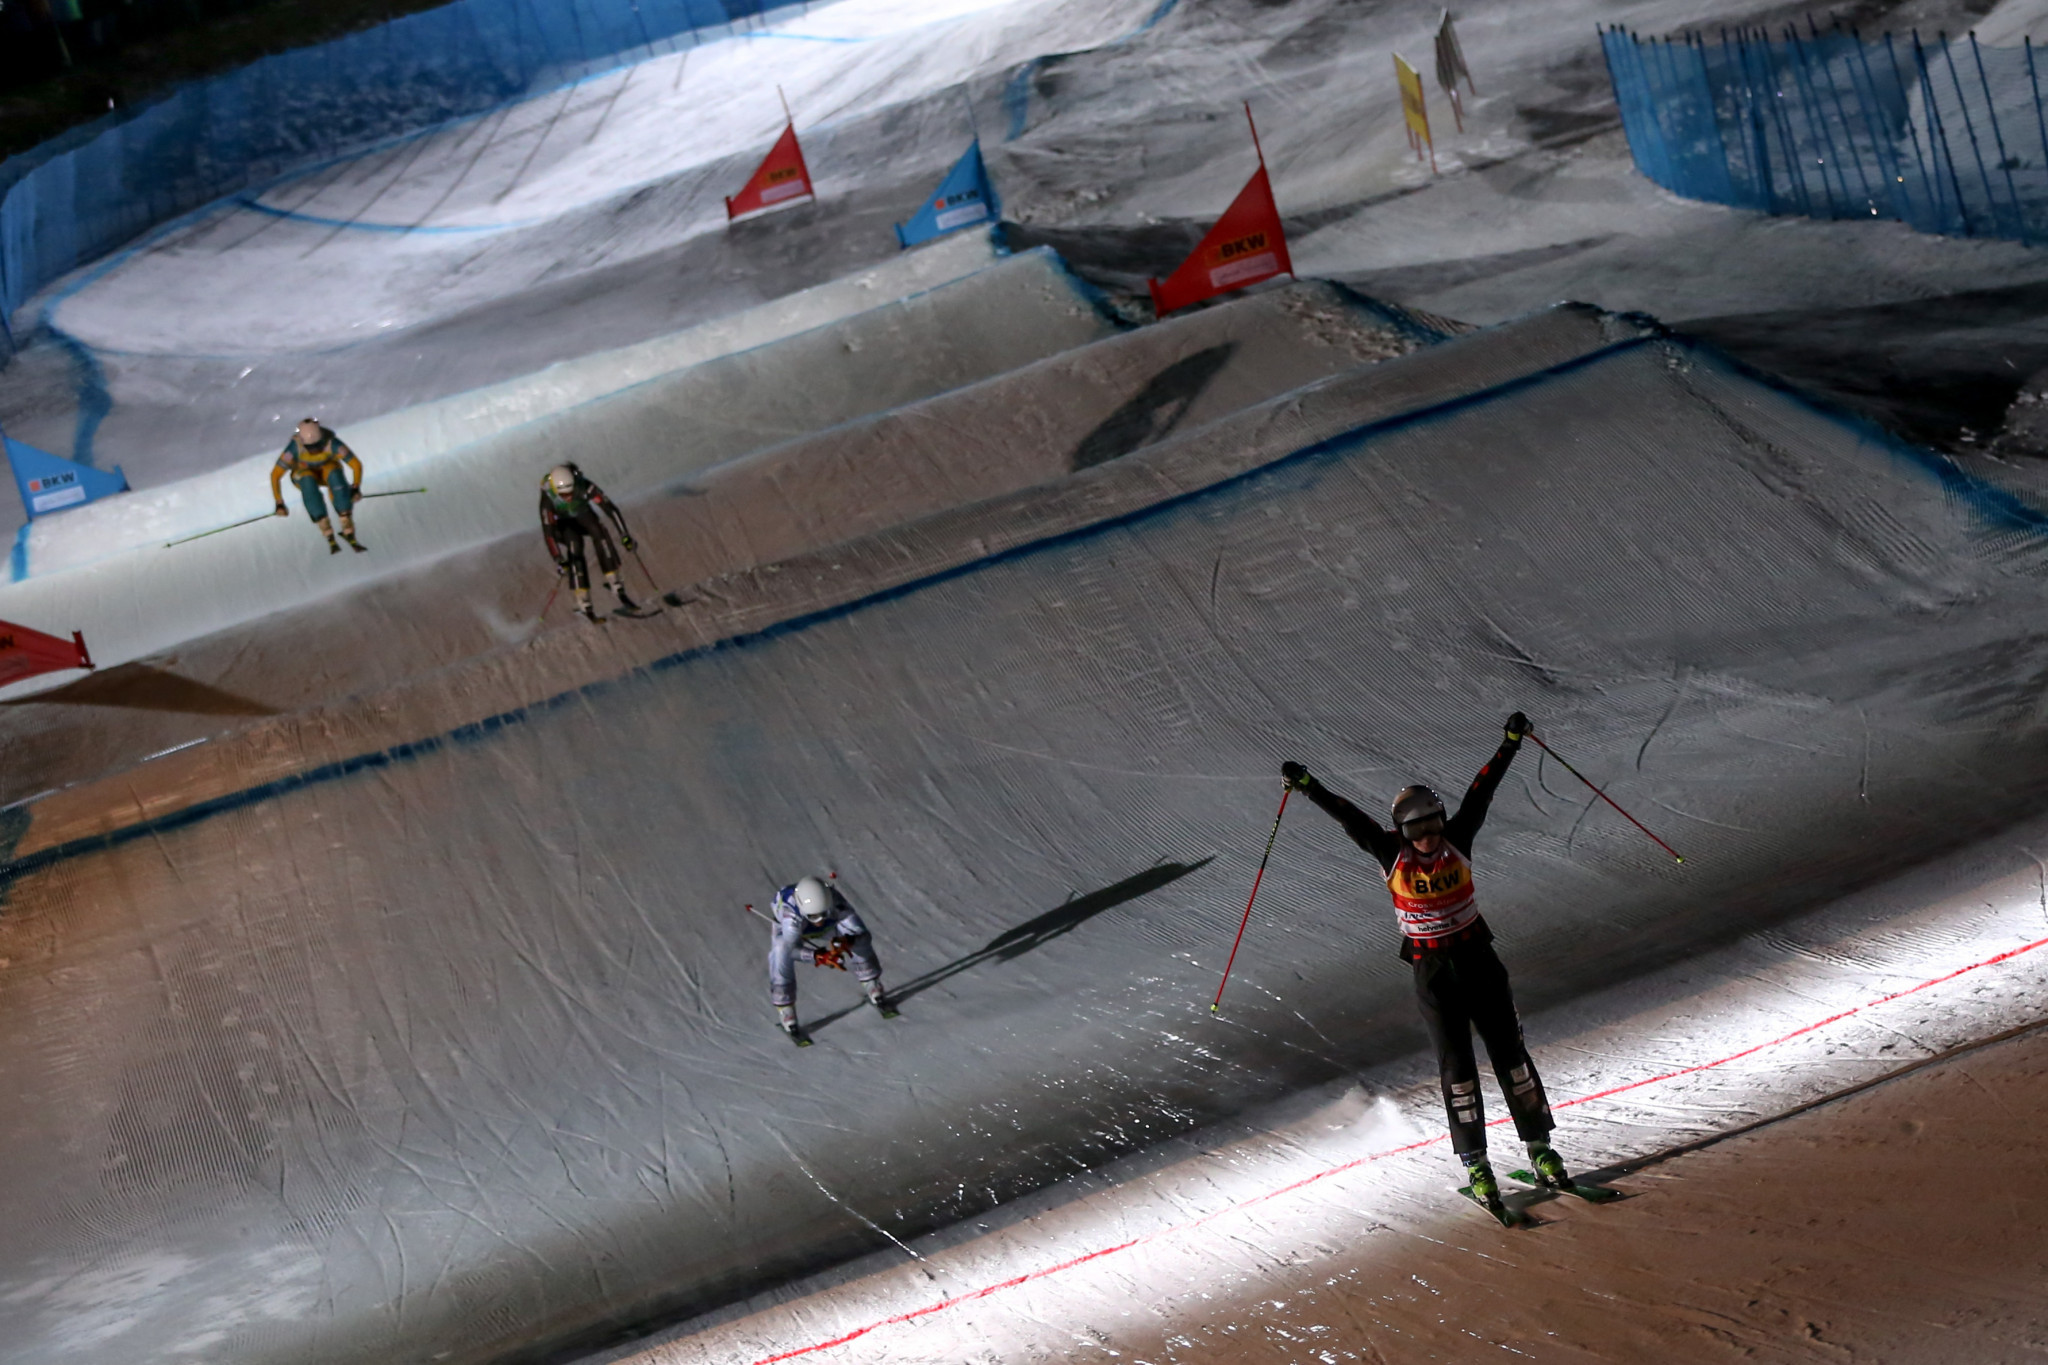 Swiss pair star under lights at home as FIS Ski Cross World Cup season starts in Arosa